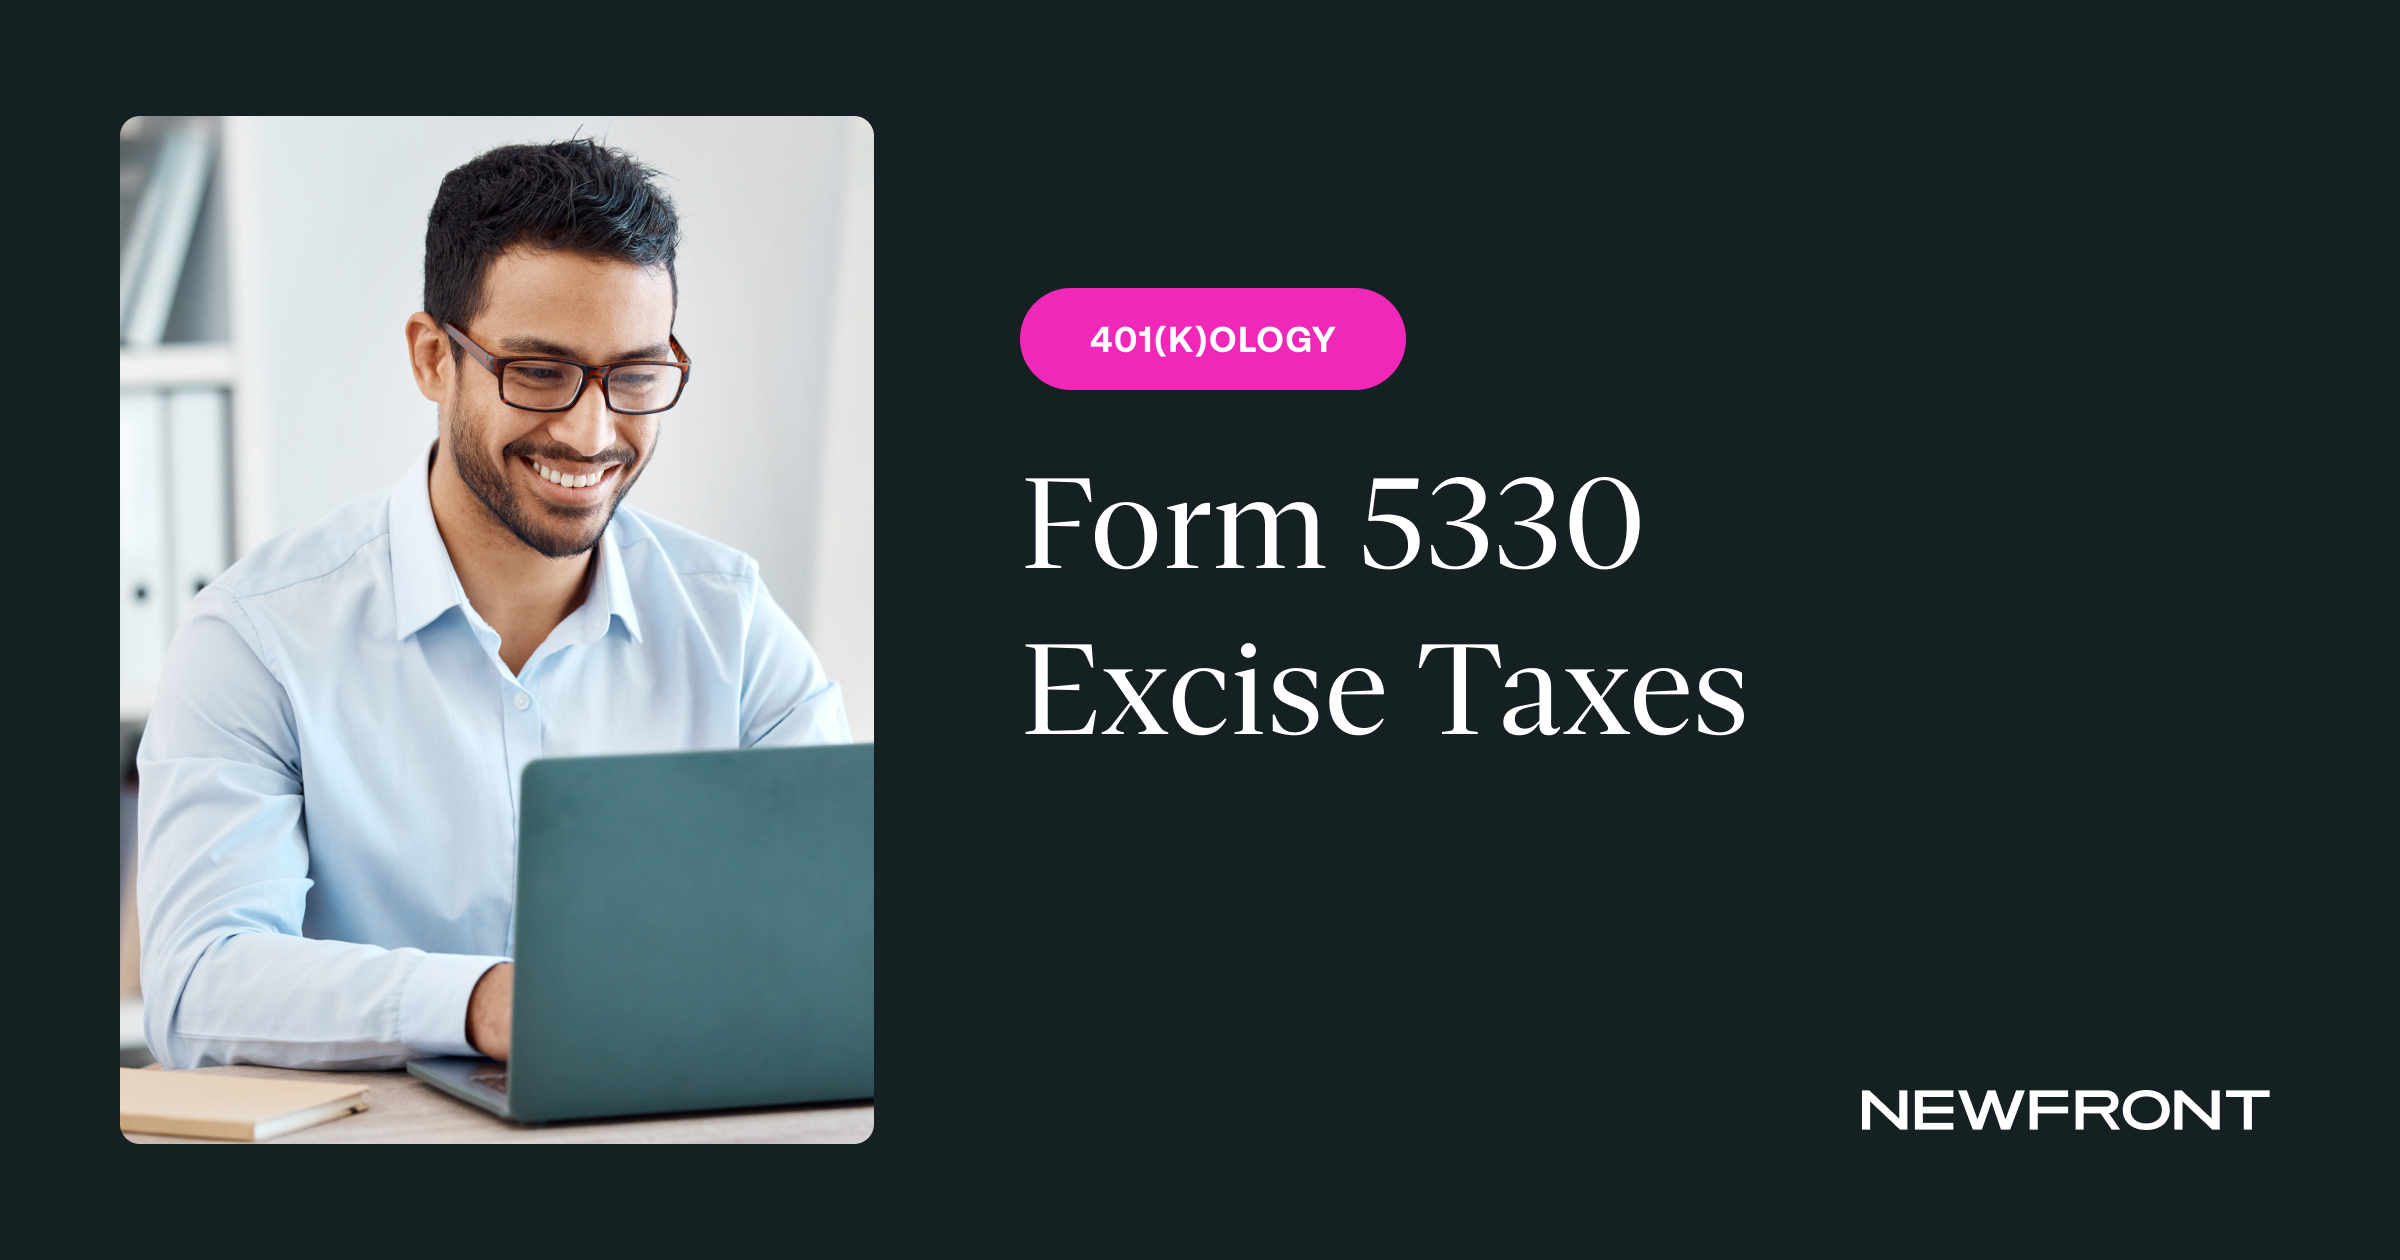 401-k-ology-form-5330-excise-taxes